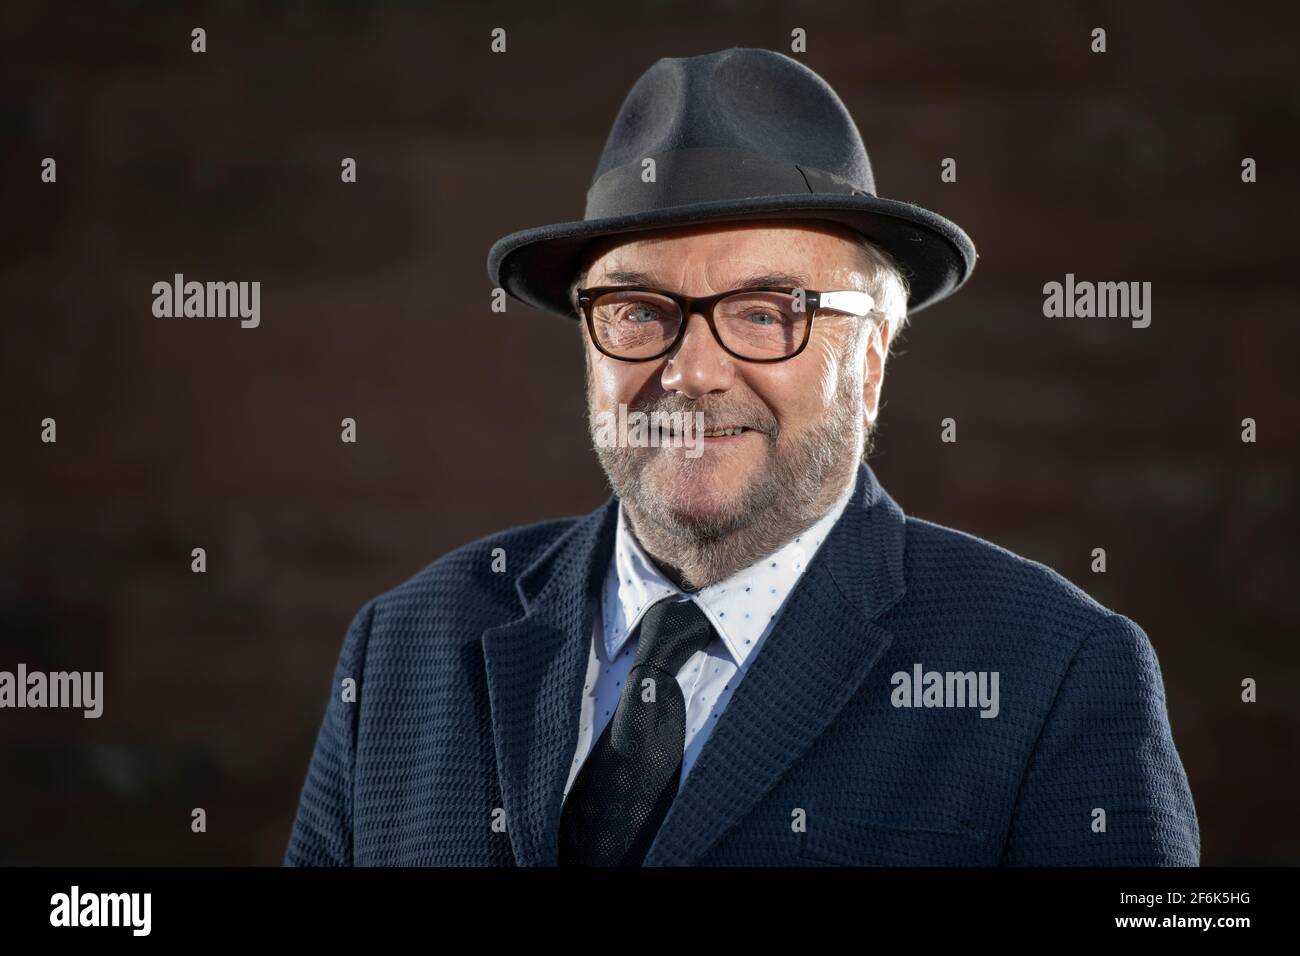 Scone, Perth, Scotland, UK. 1st Apr, 2021. PICTURED: Exclusive images of  George Galloway, Leader of the All For Unity Party. George Galloway is a  British Politician, Broadcaster and writer. He currently presents